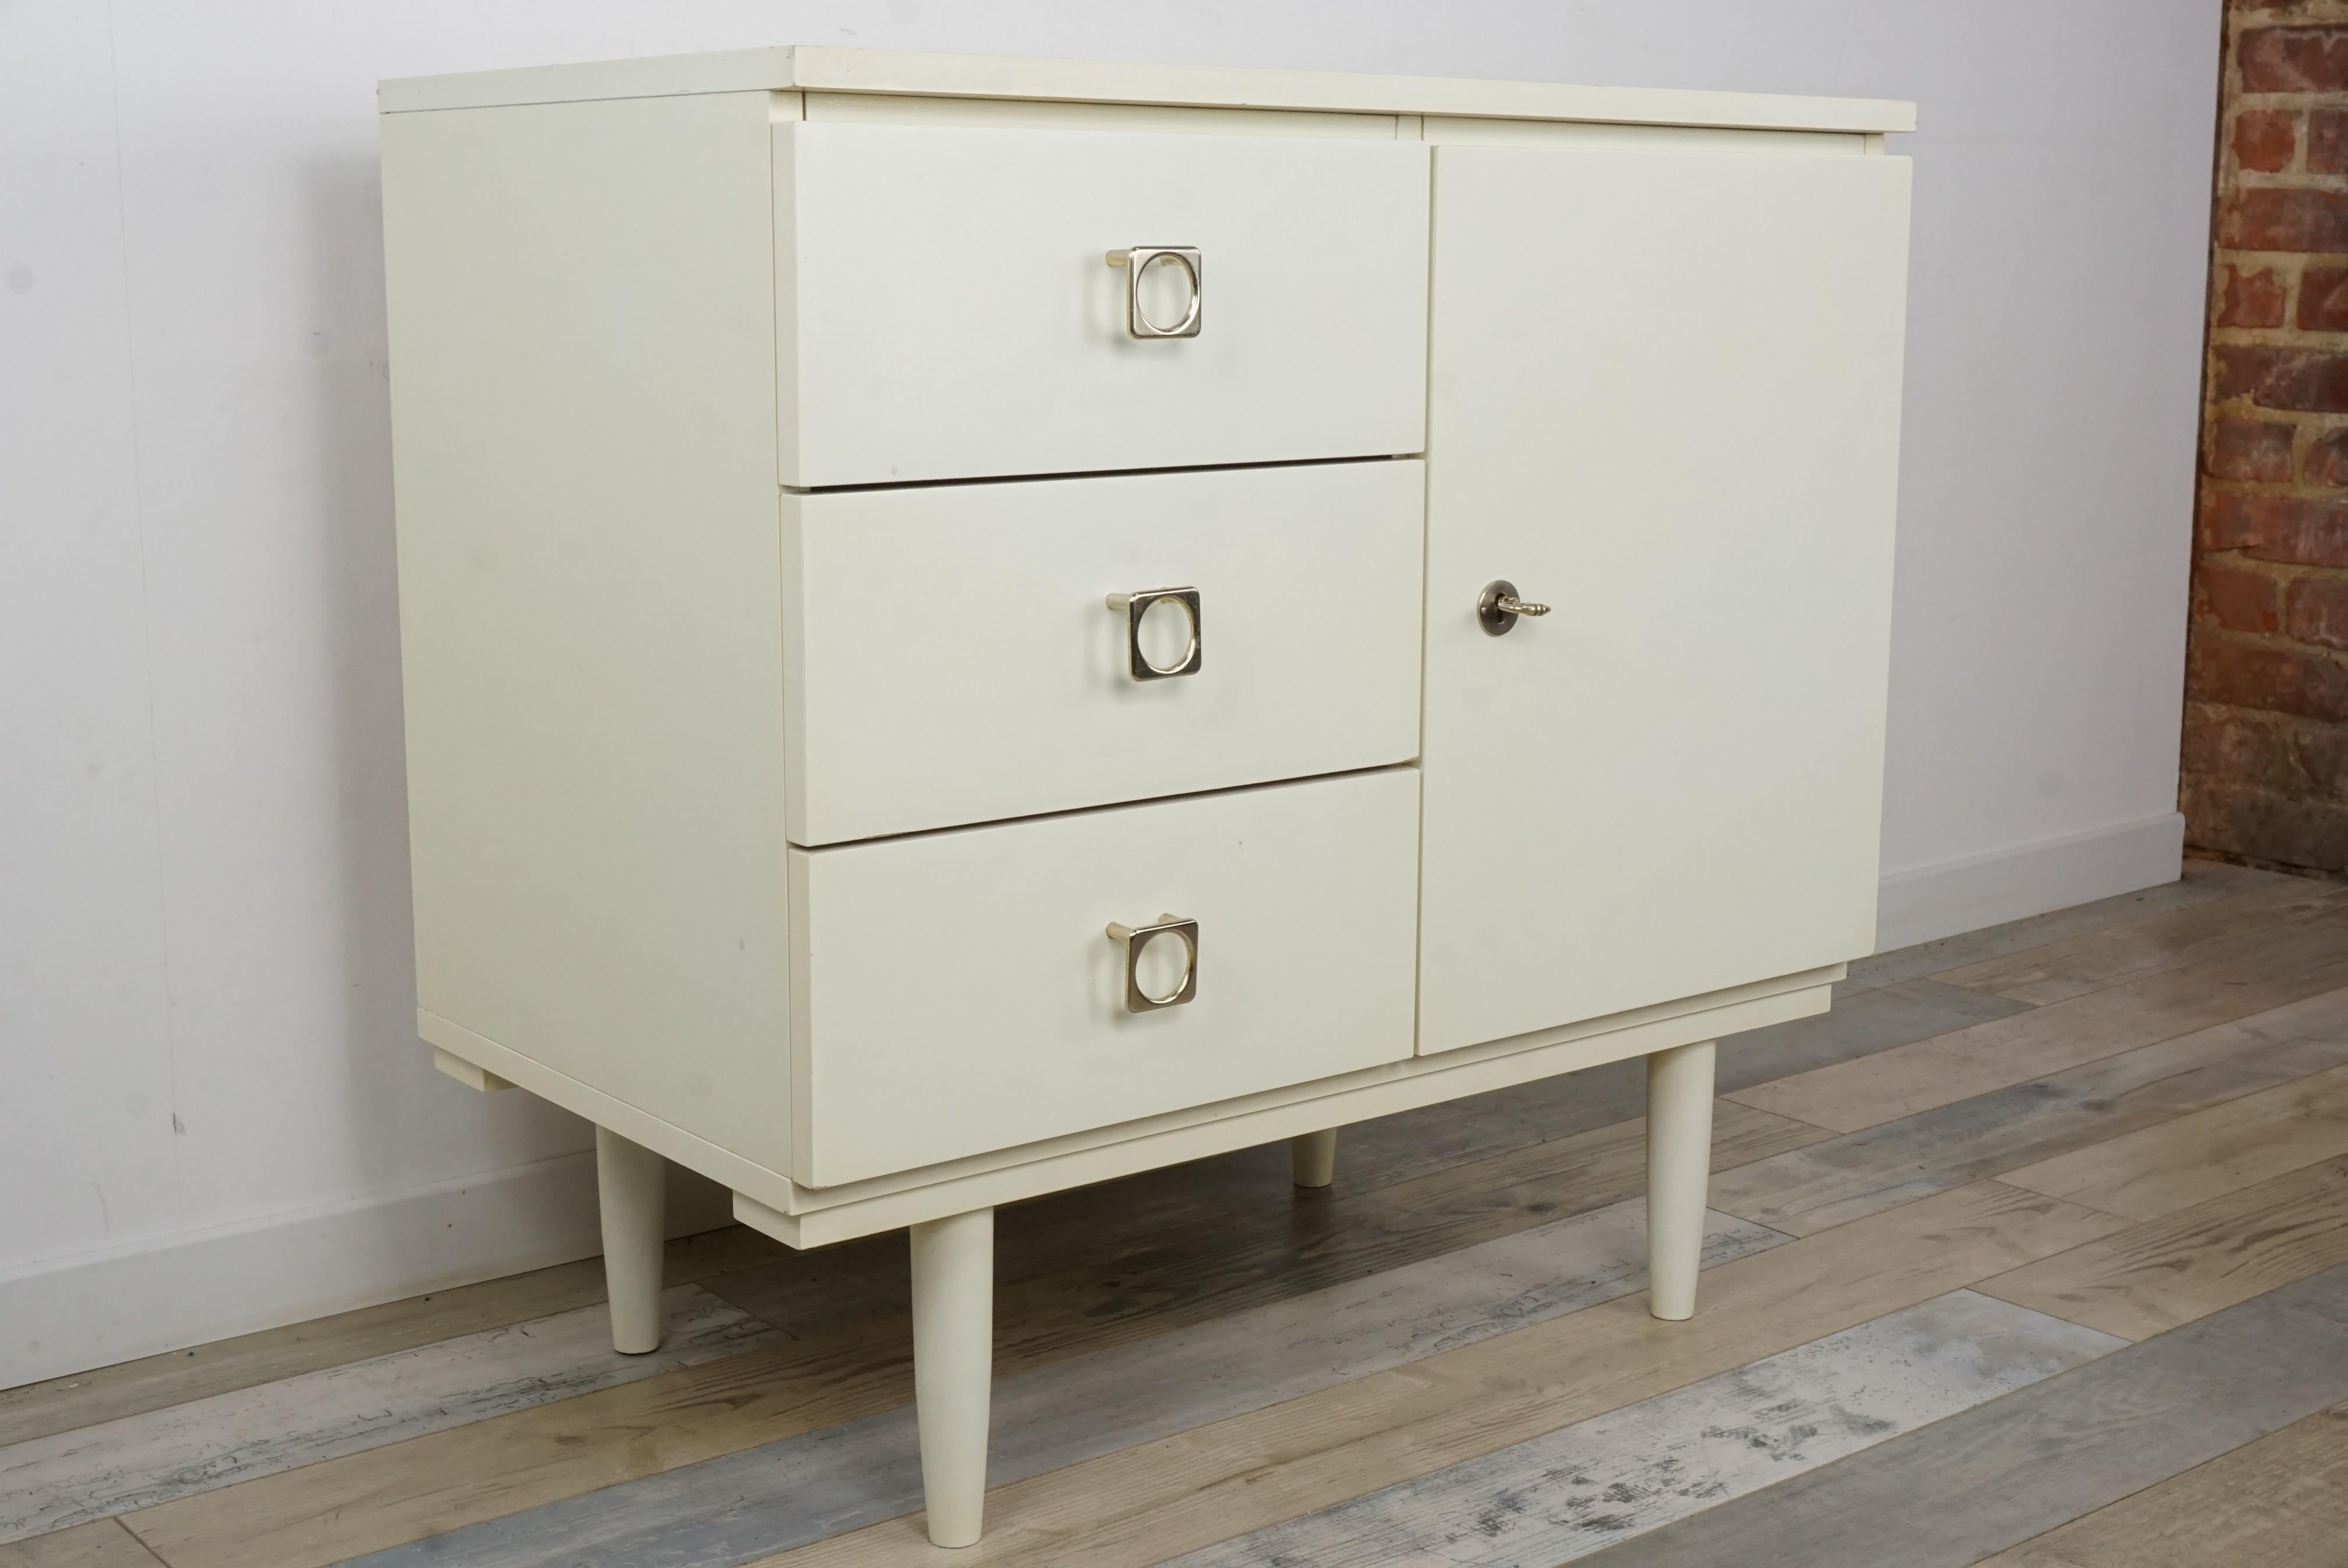 1950s-1960s White Satin Lacquered Wooden Cabinet 3